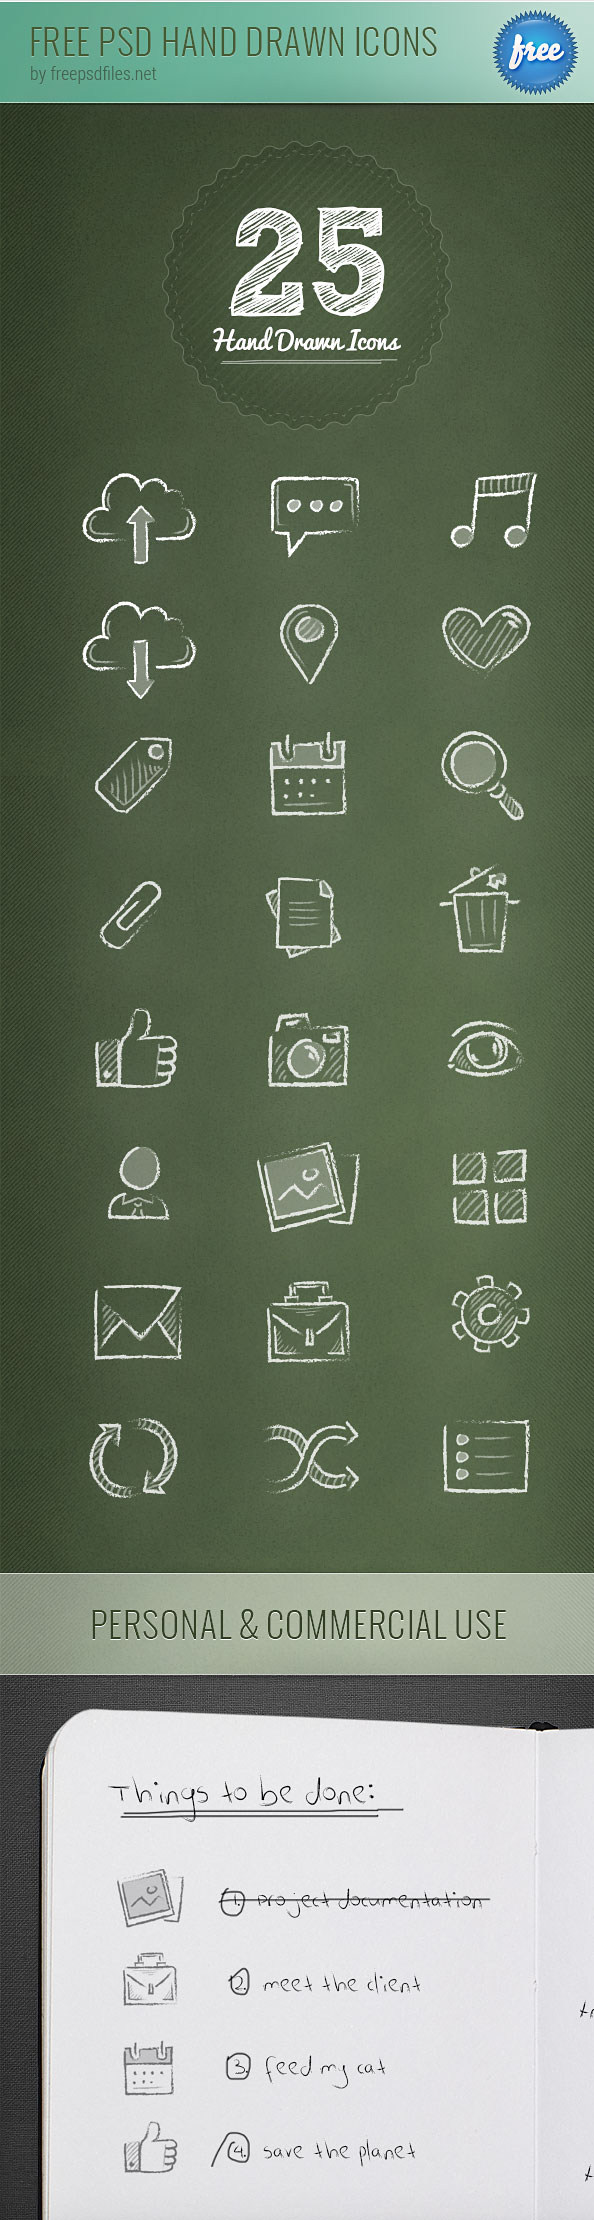 Free PSD Hand Drawn Icons Preview